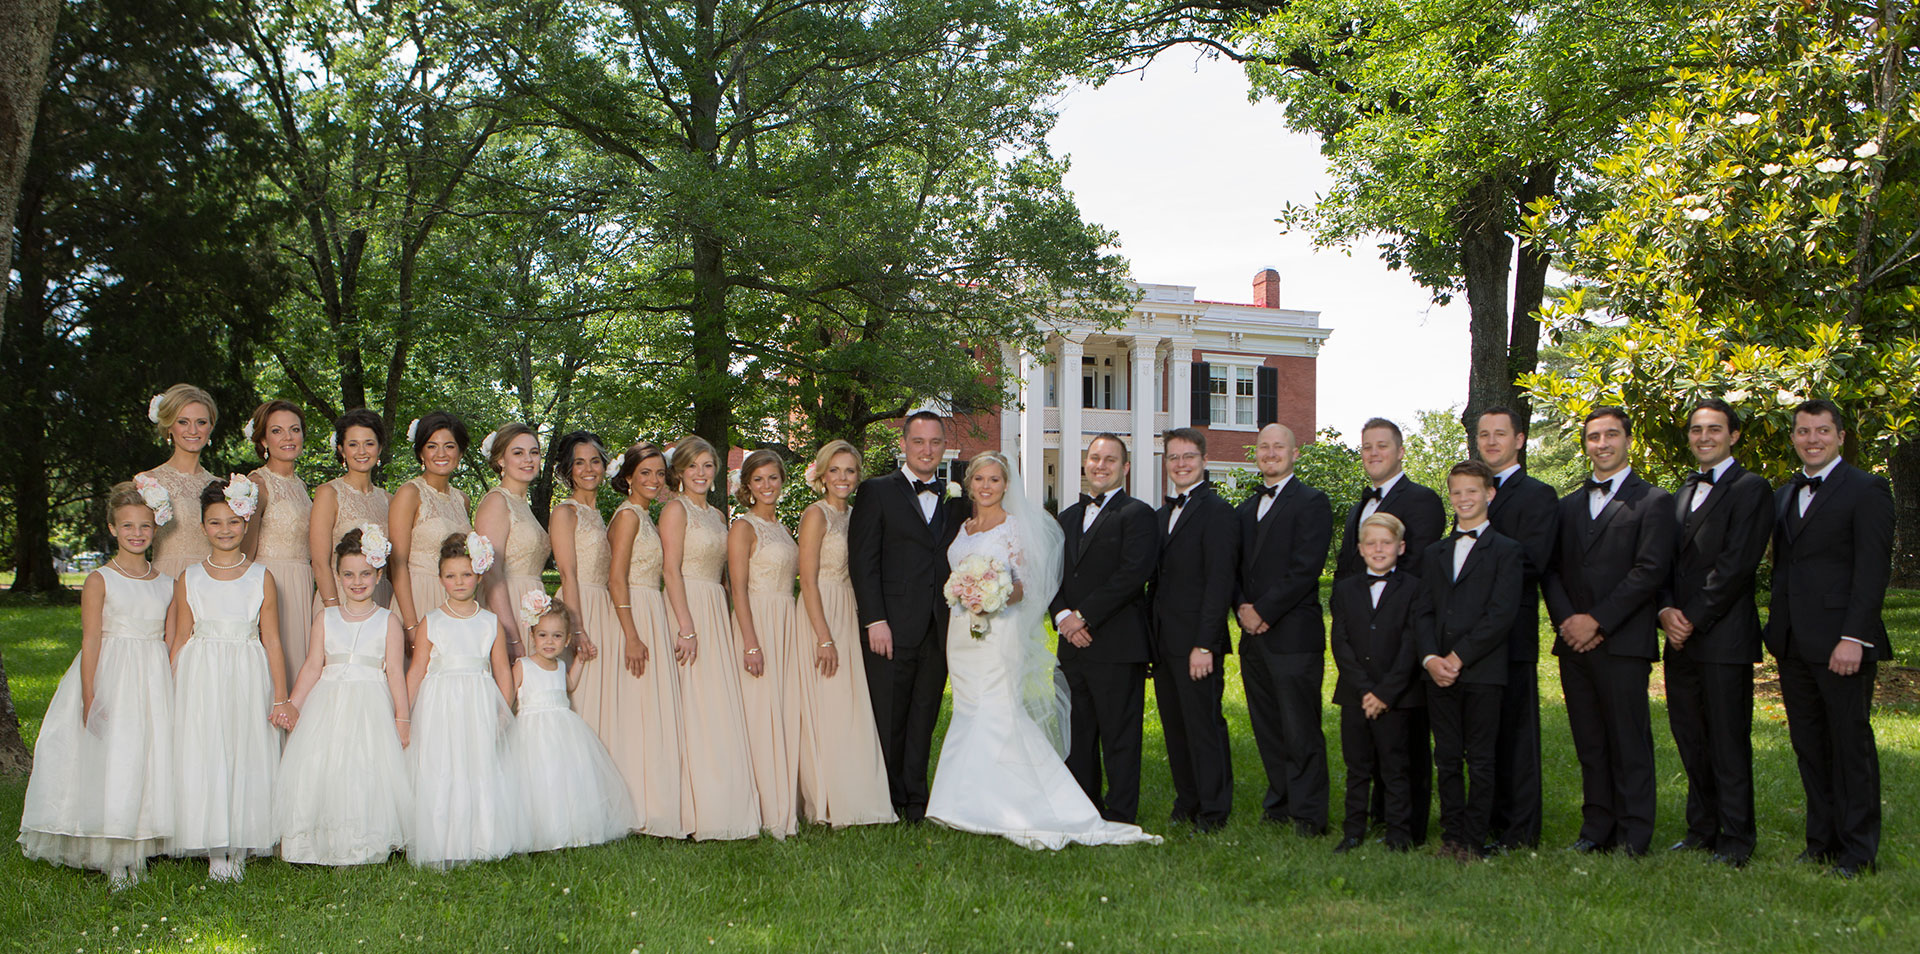 concept-25-of-wedding-pictures-with-bridesmaids-and-groomsmen